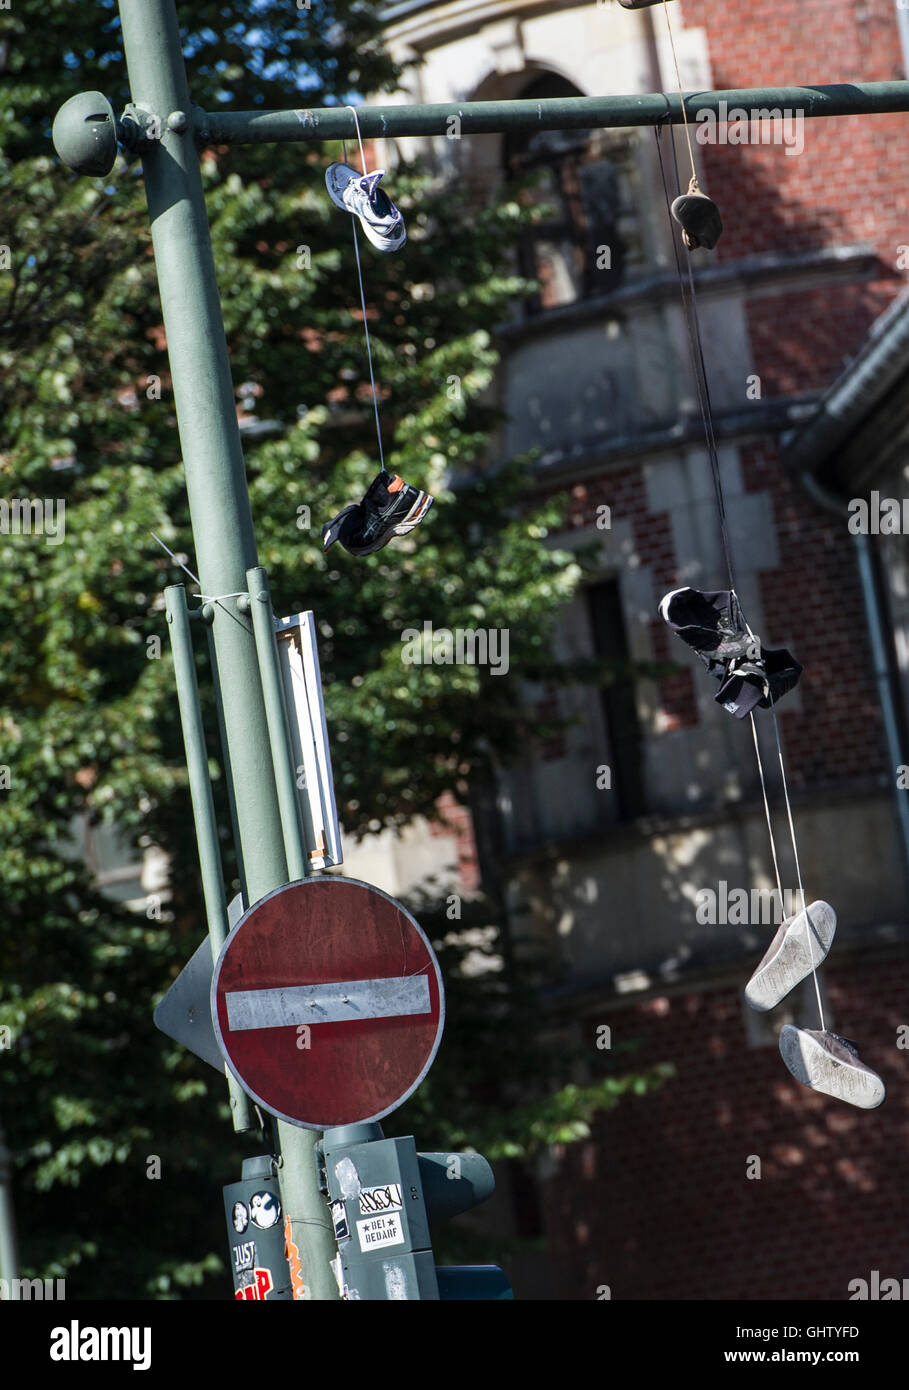 Berlin, Germany. 11th Aug, 2016. Several shoes hanging from a traffic light  pole in Berlin, Germany, 11 August 2016. This is the result of so-called " shoe tossing" - a trend that is